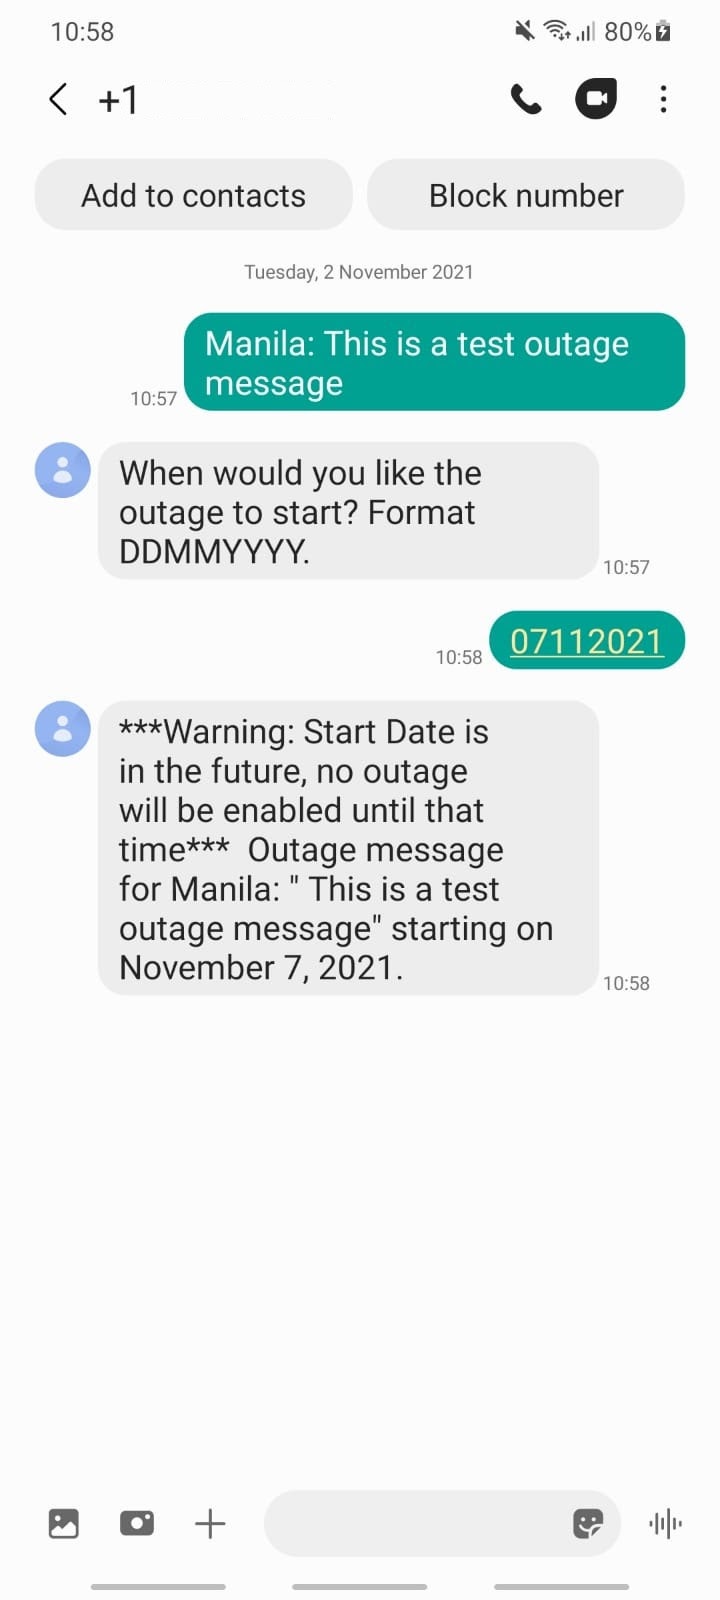 An image of the SMS conversation initiated by the allowed number